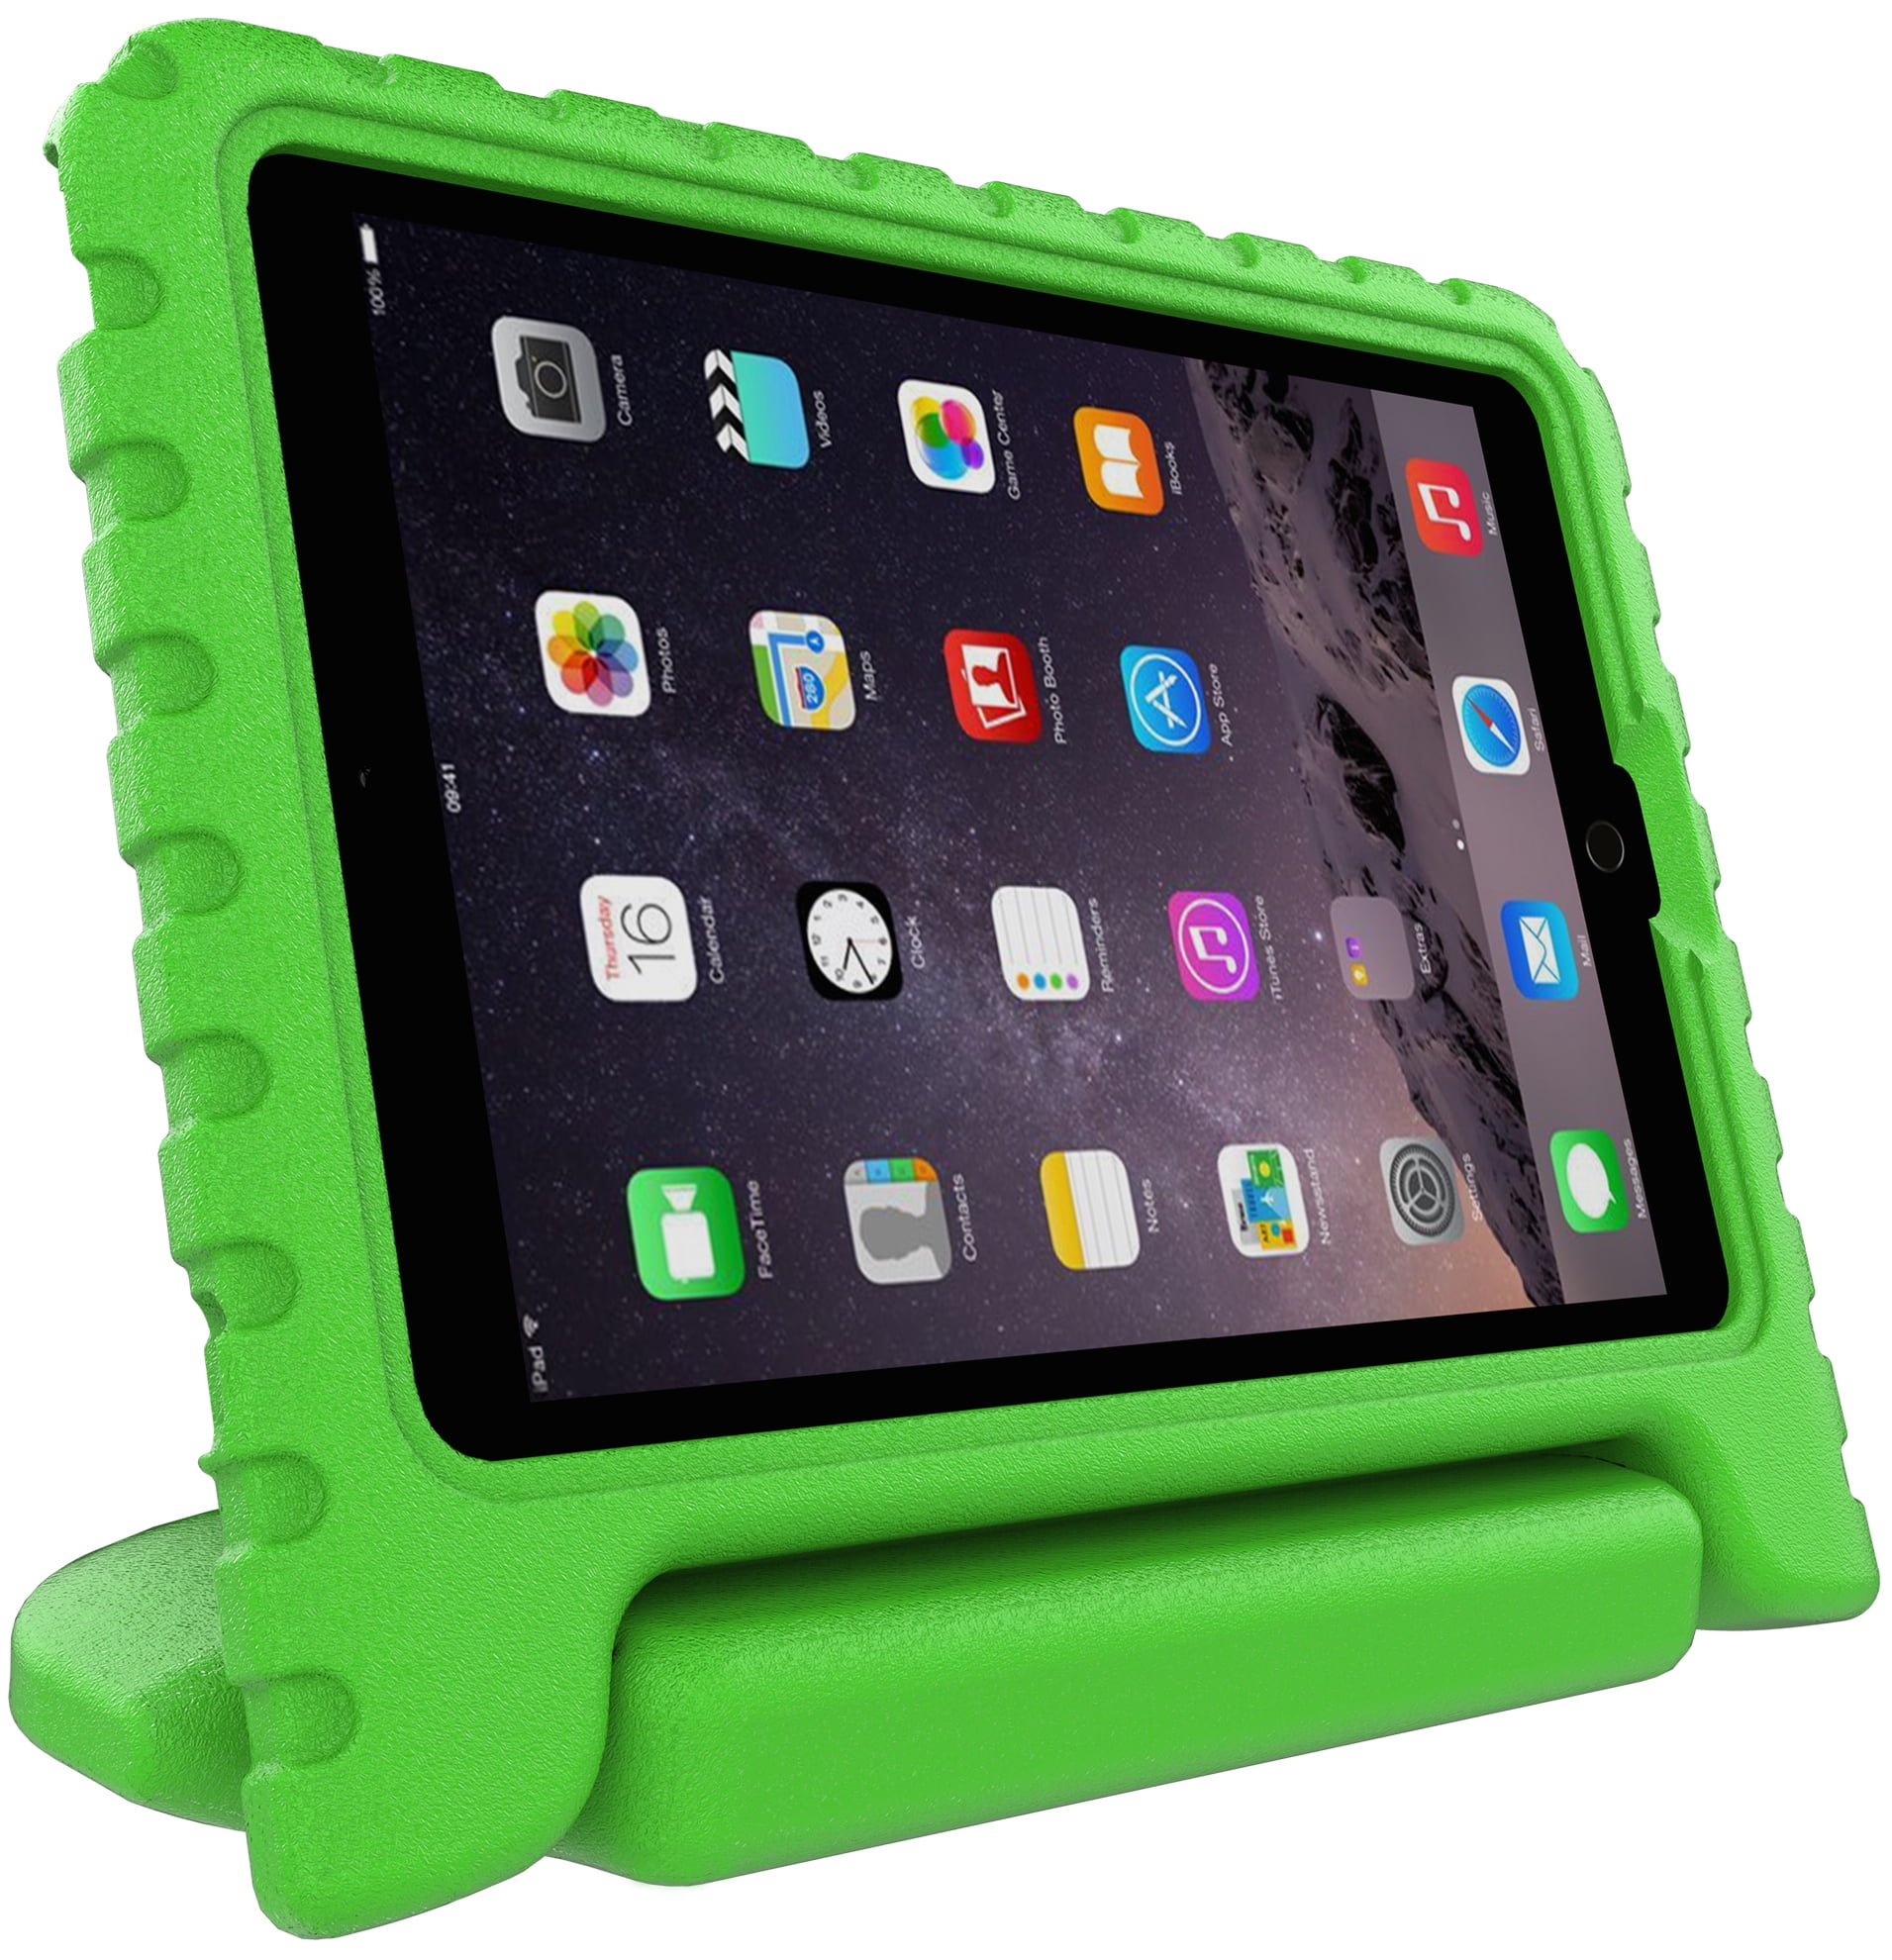 stalion-safe-shockproof-foam-kids-case-with-handle-for-apple-ipad-2-3-4